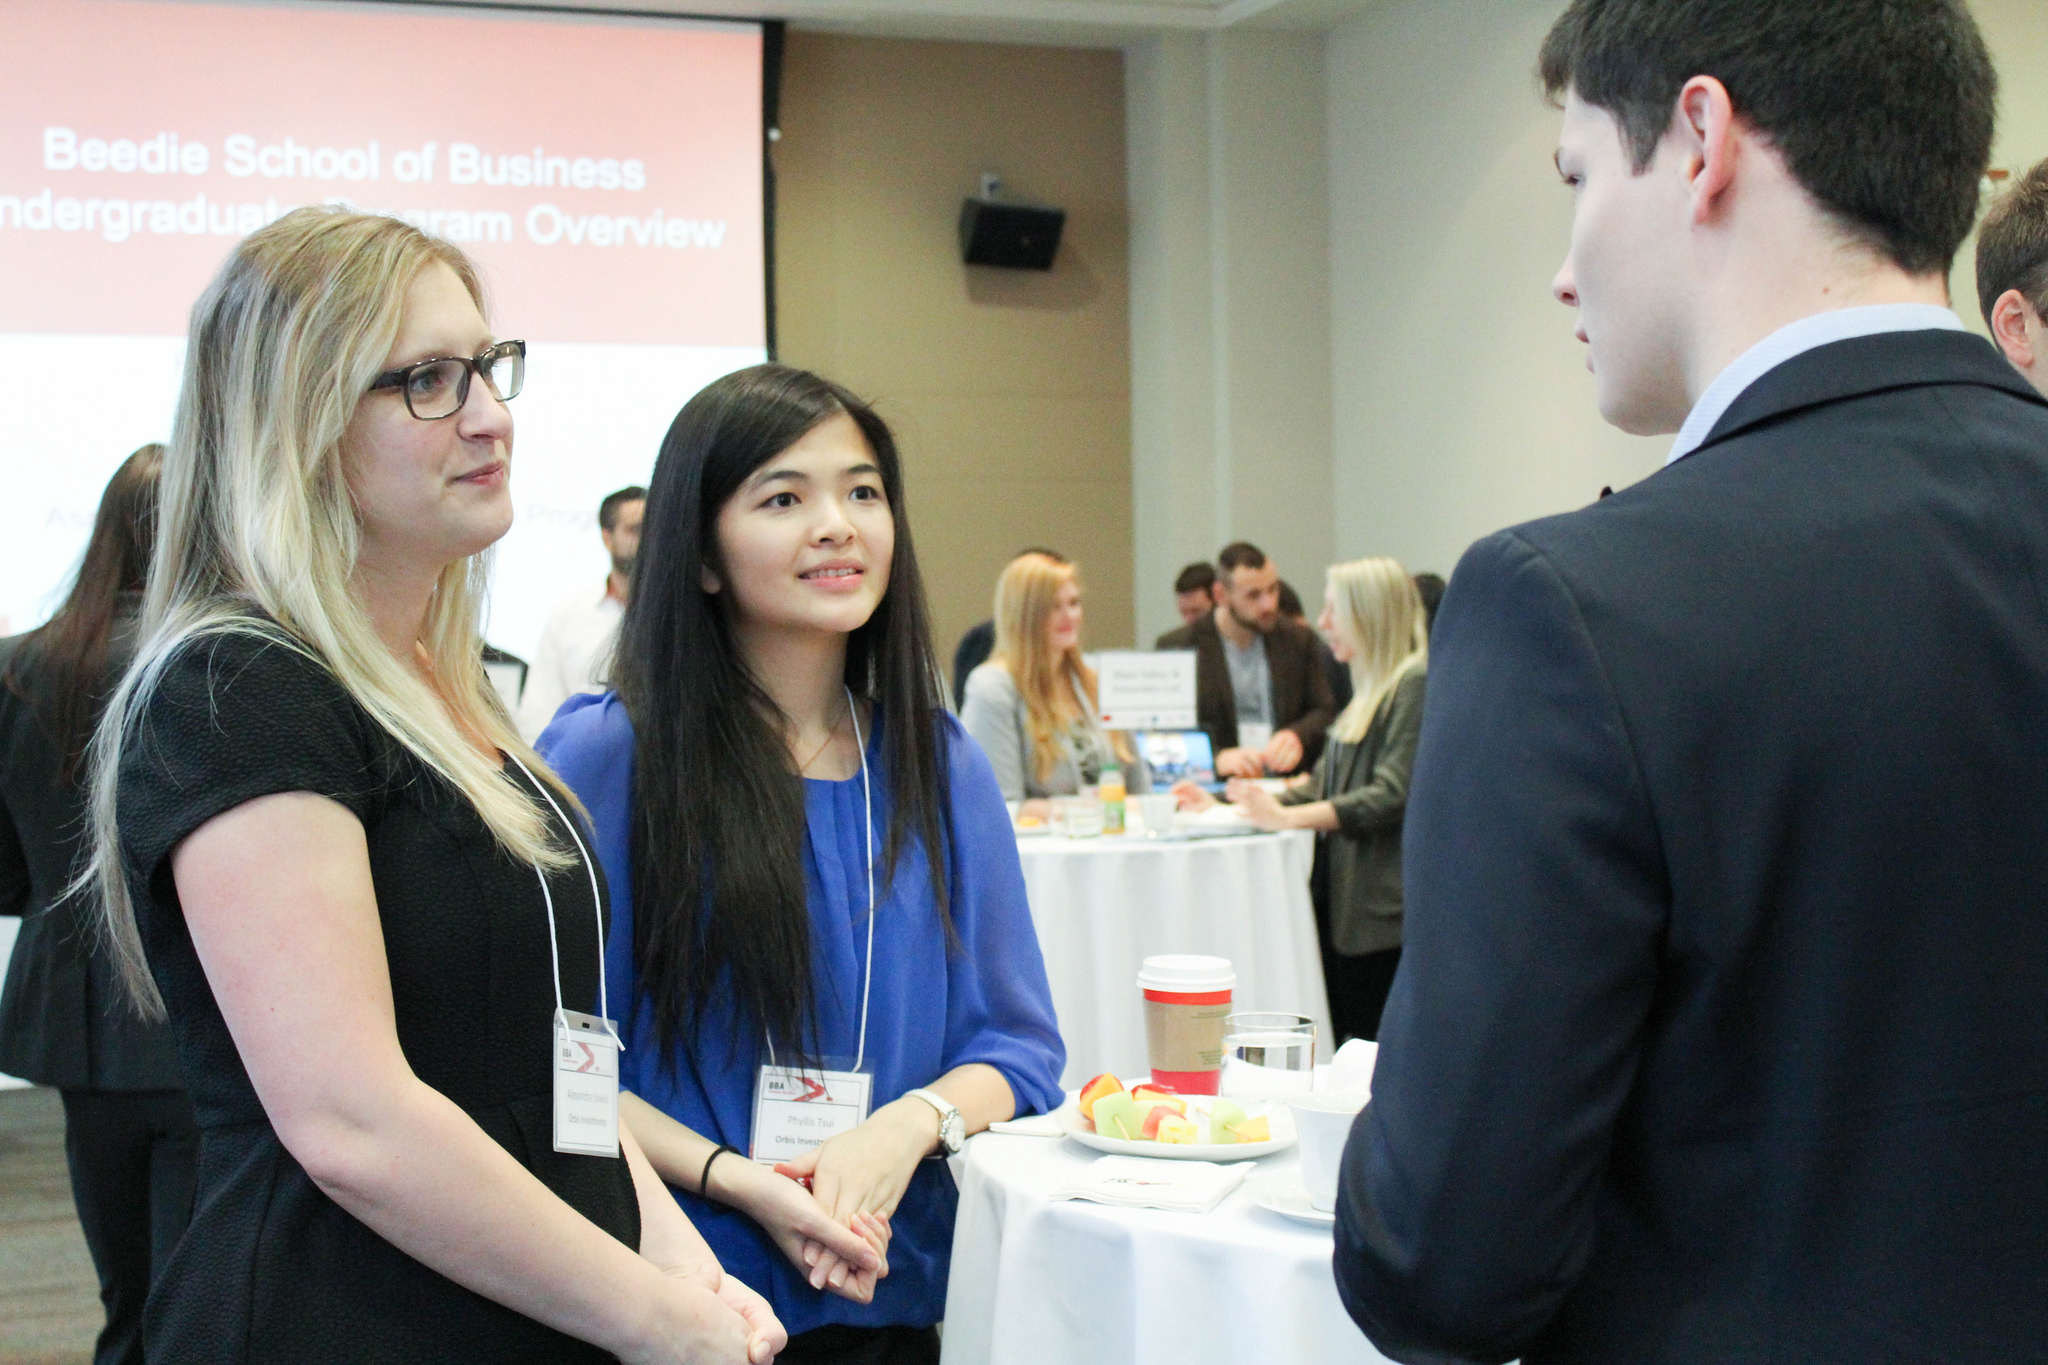 Students in the Bus 343 class participated in a mock networking event with Beedie alumni and industry professionals as part of the Business Career Passport. 